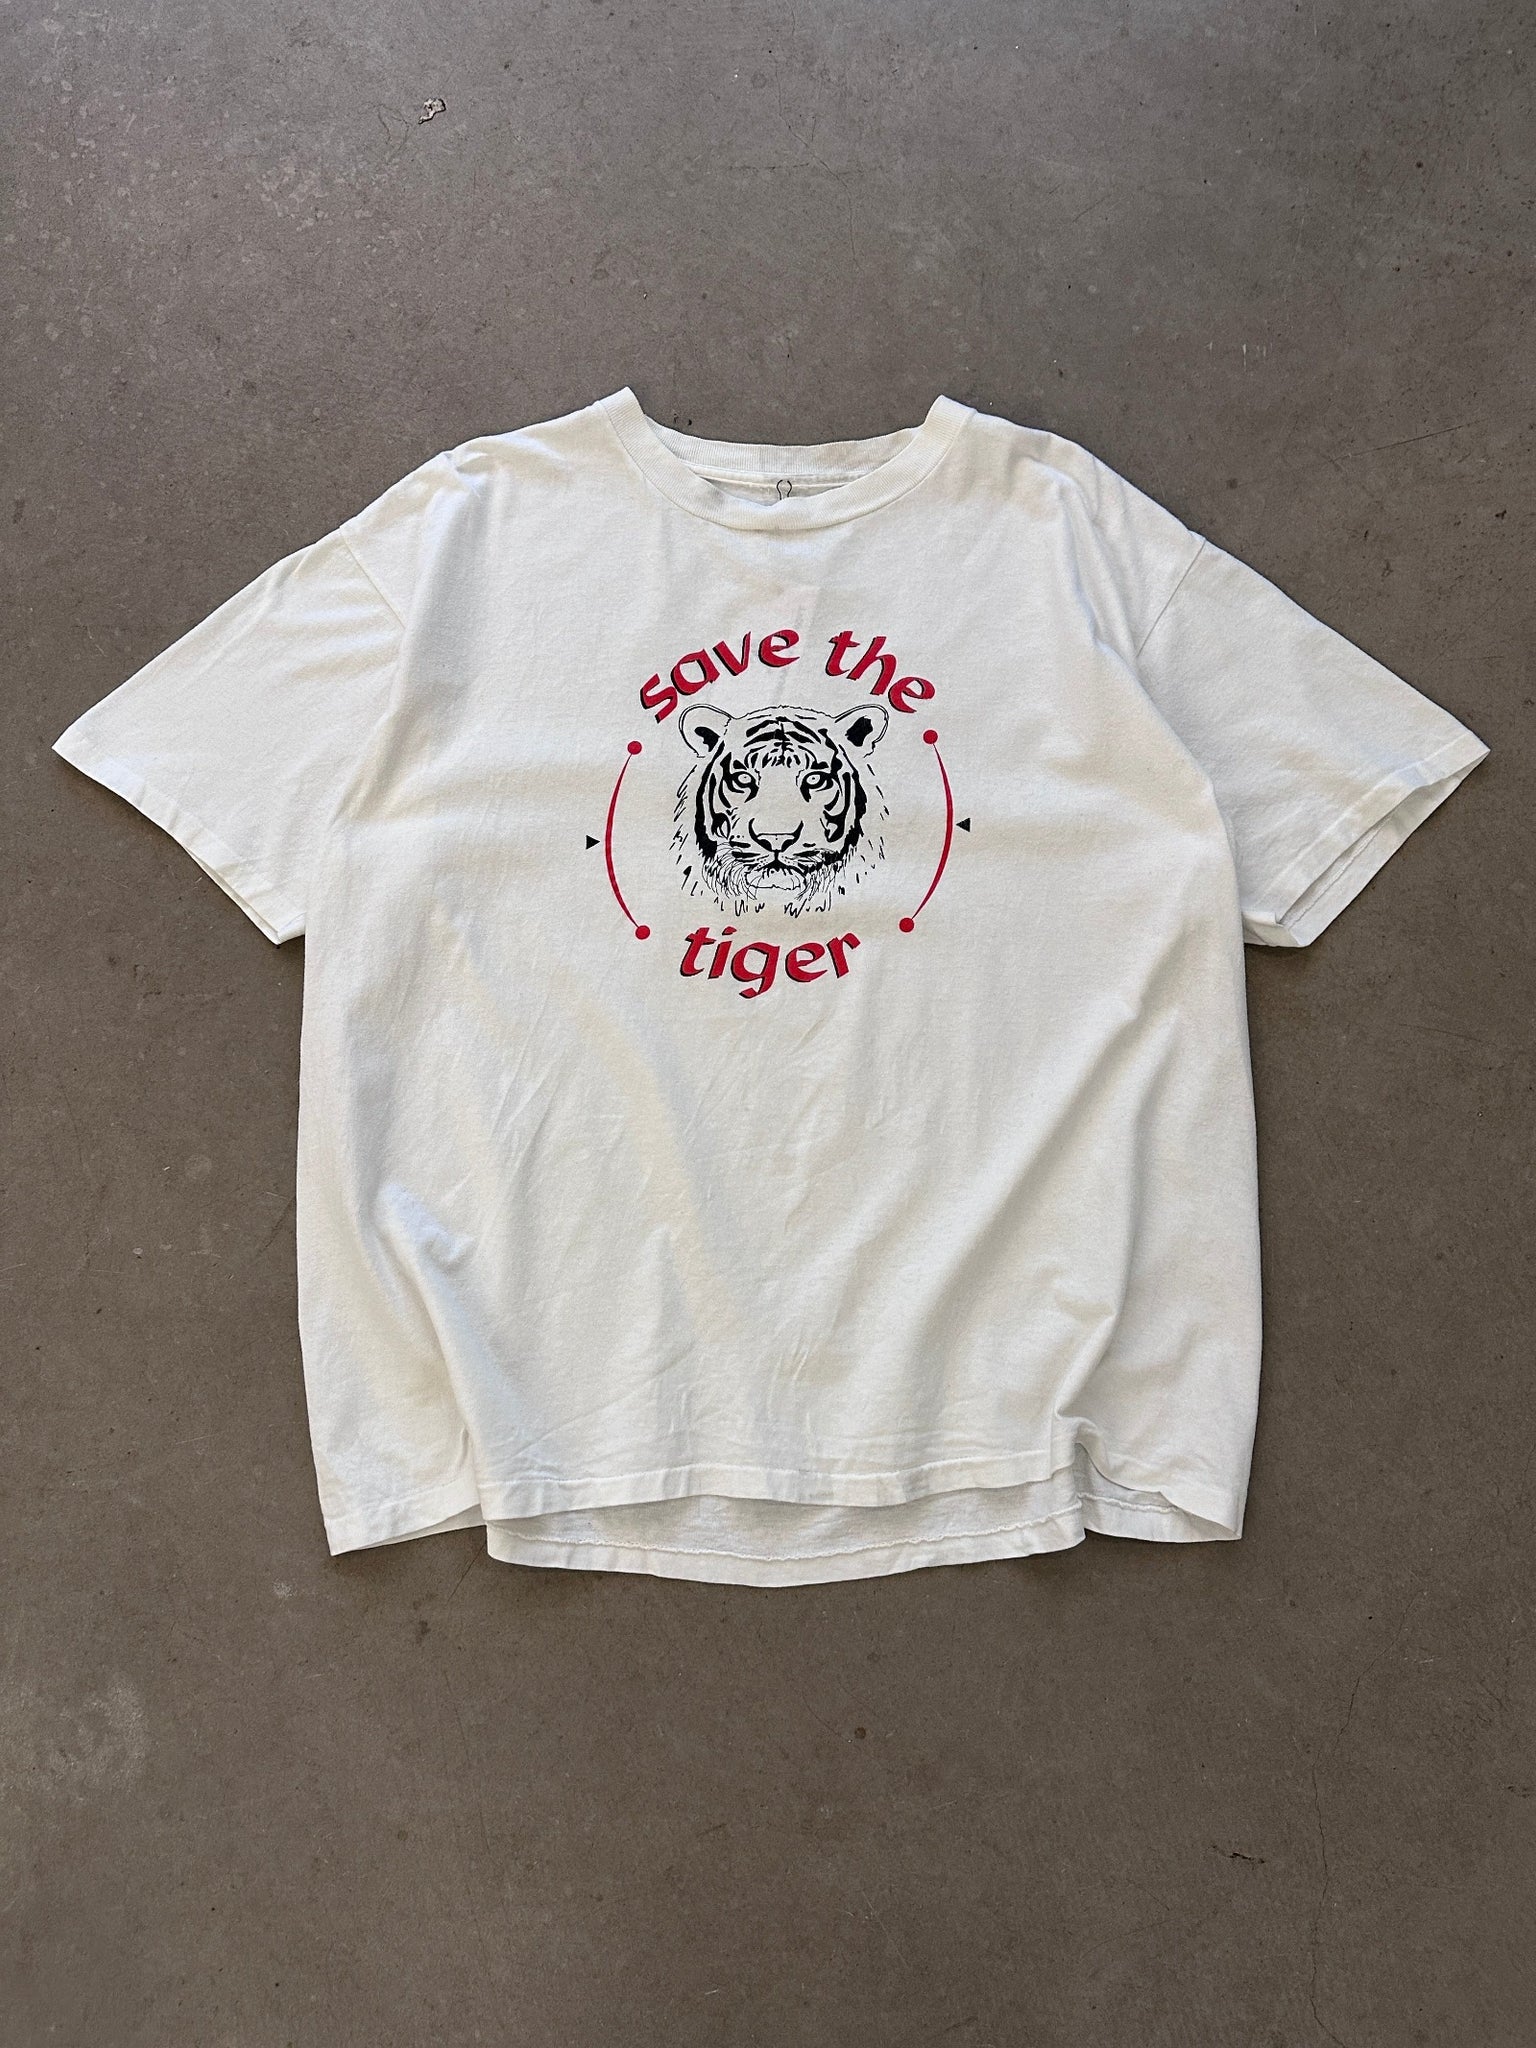 1990's WWF Save The Tiger T-Shirt - XL